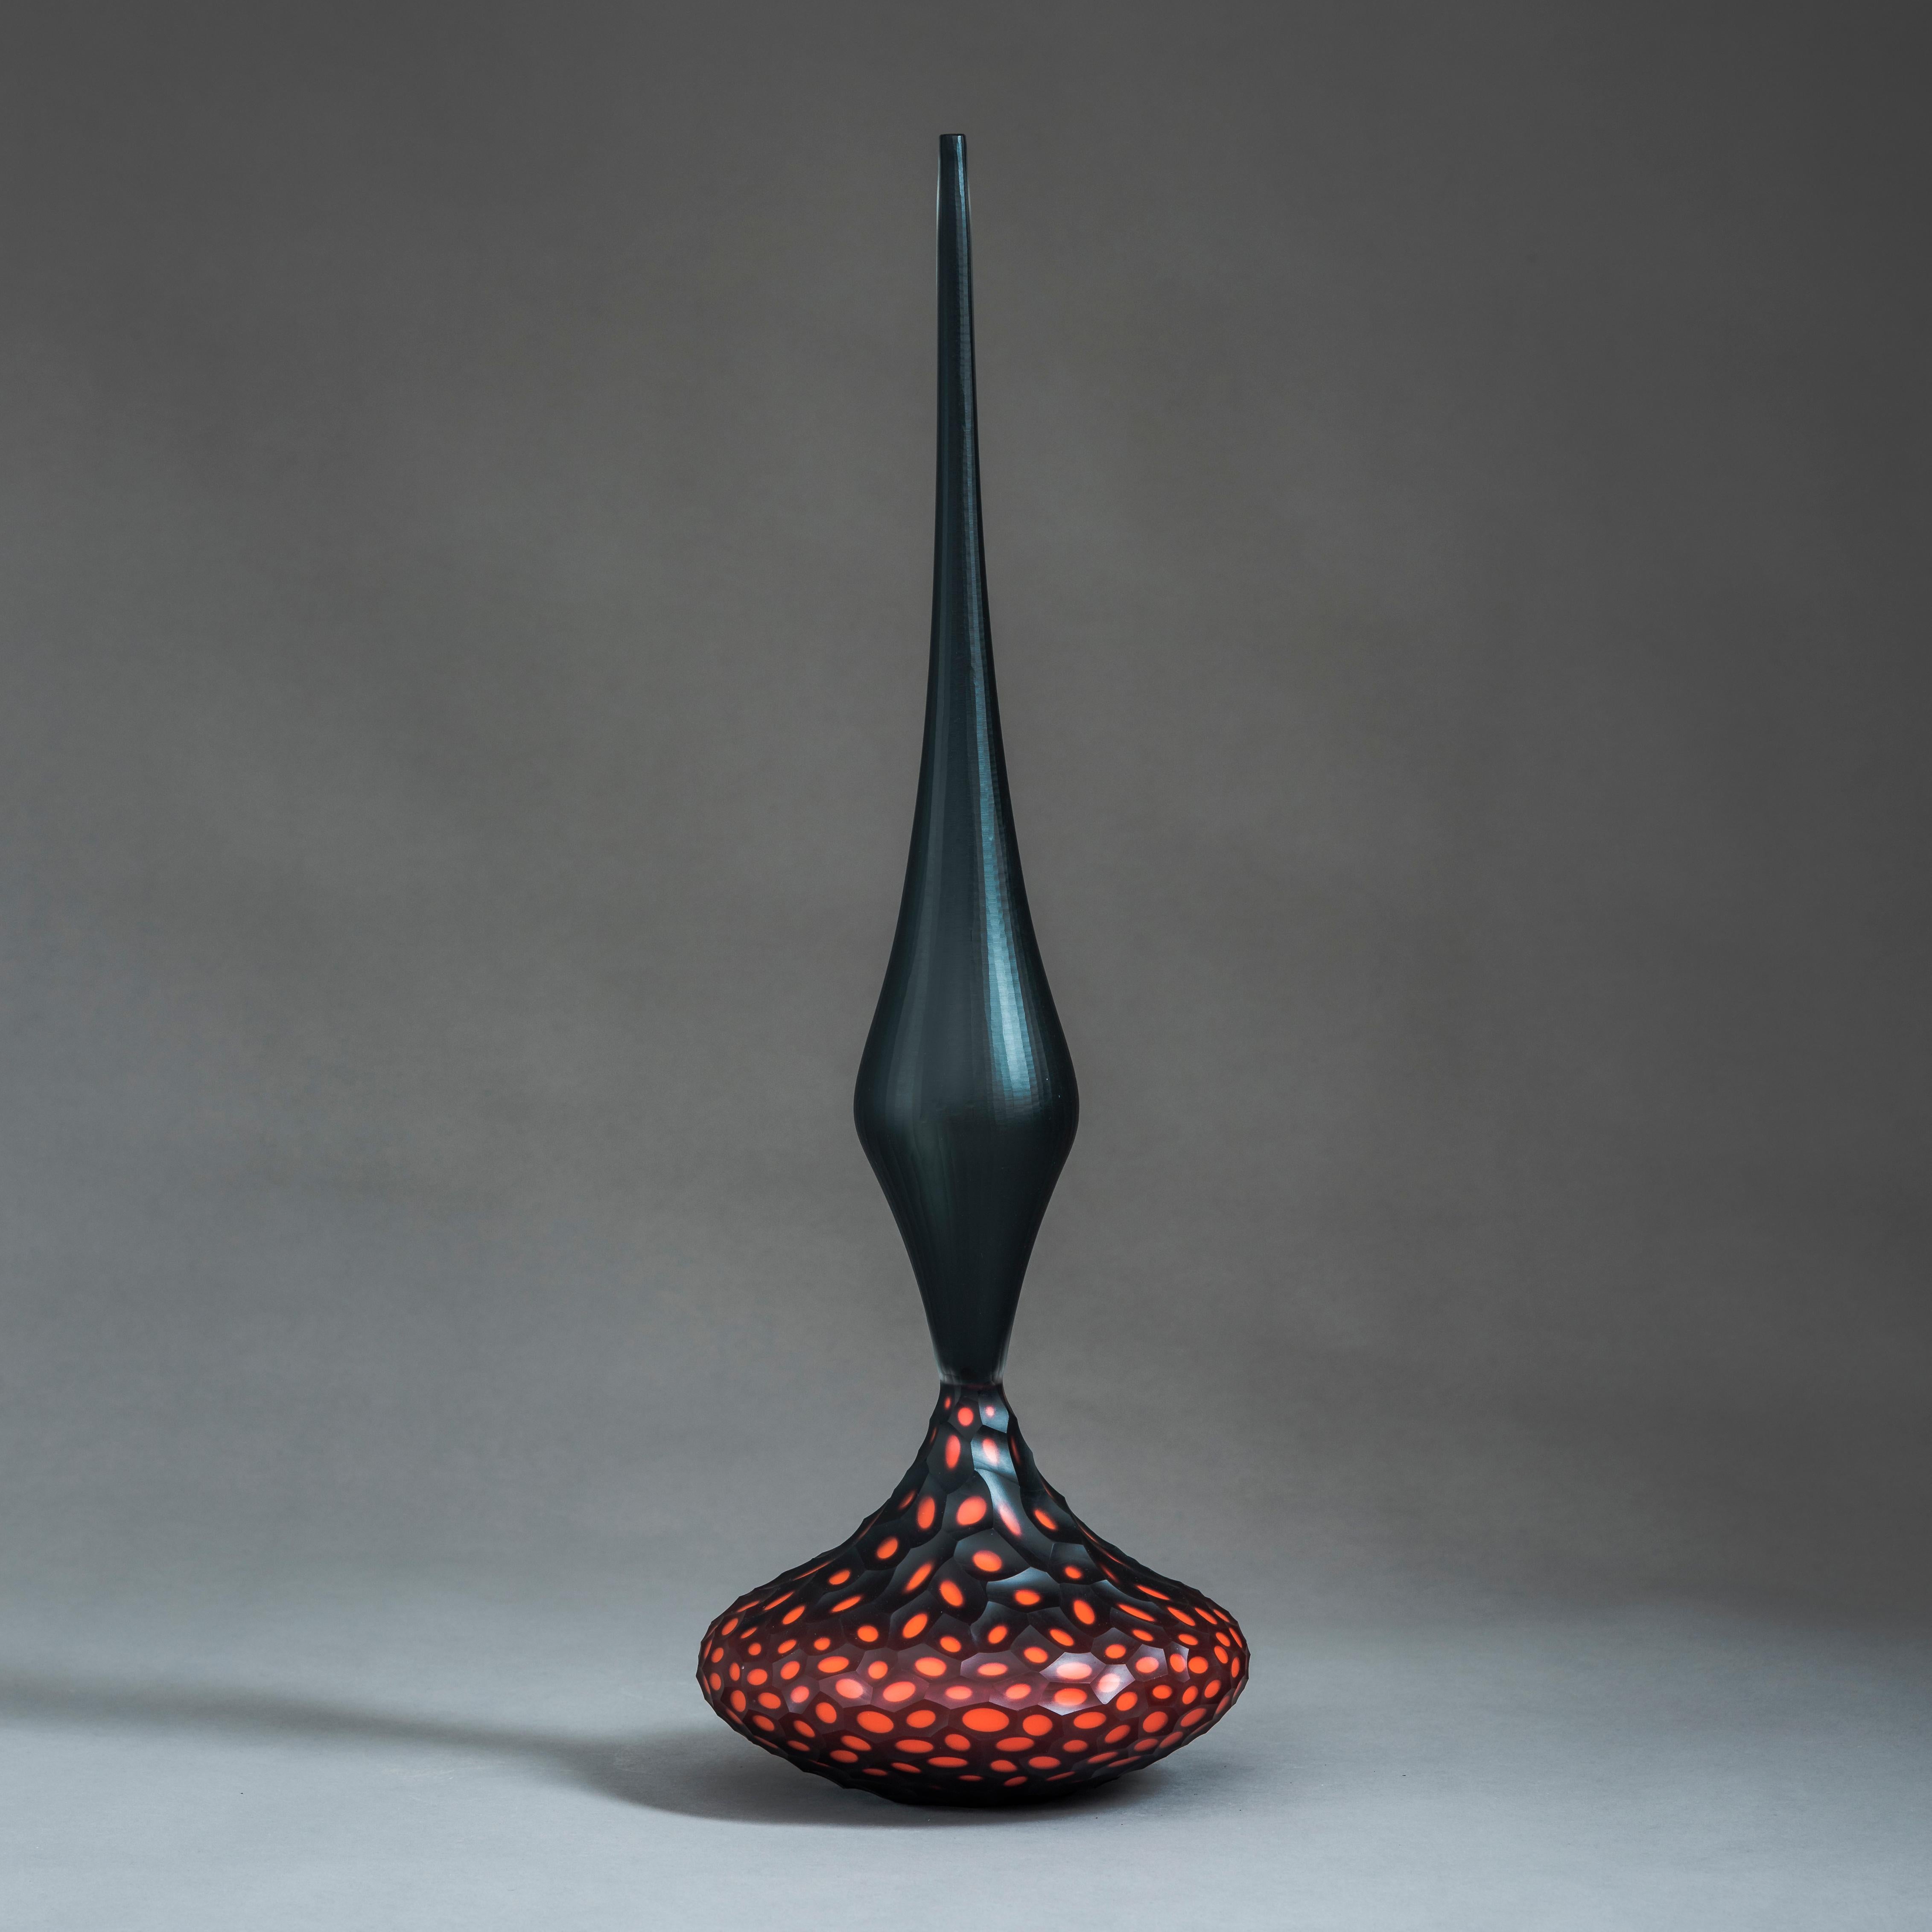 Deep Red Twilight III is a sculpture in red and blue / black glass by Philip Baldwin & Monica Guggisberg. A unique and exquisite artwork, which has been handblown and cut to the highest quality and refinement. 
Scandinavian and Venetian glassmaking